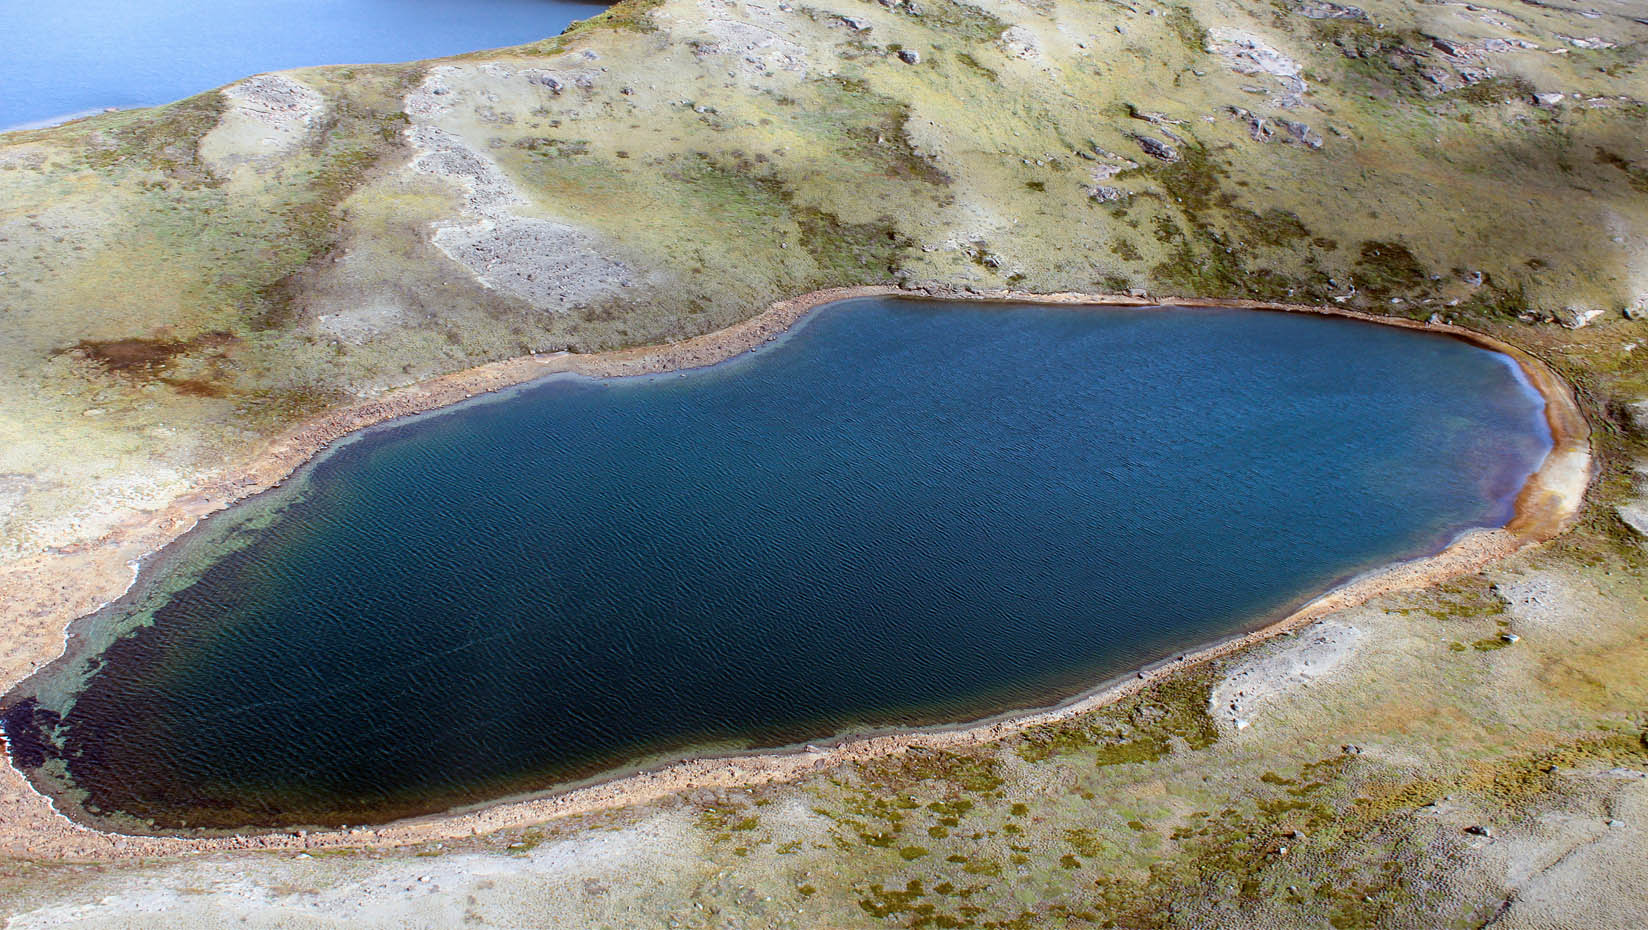 A photo of an Arctic lake in West Greenland, with noticeable decline in lake level